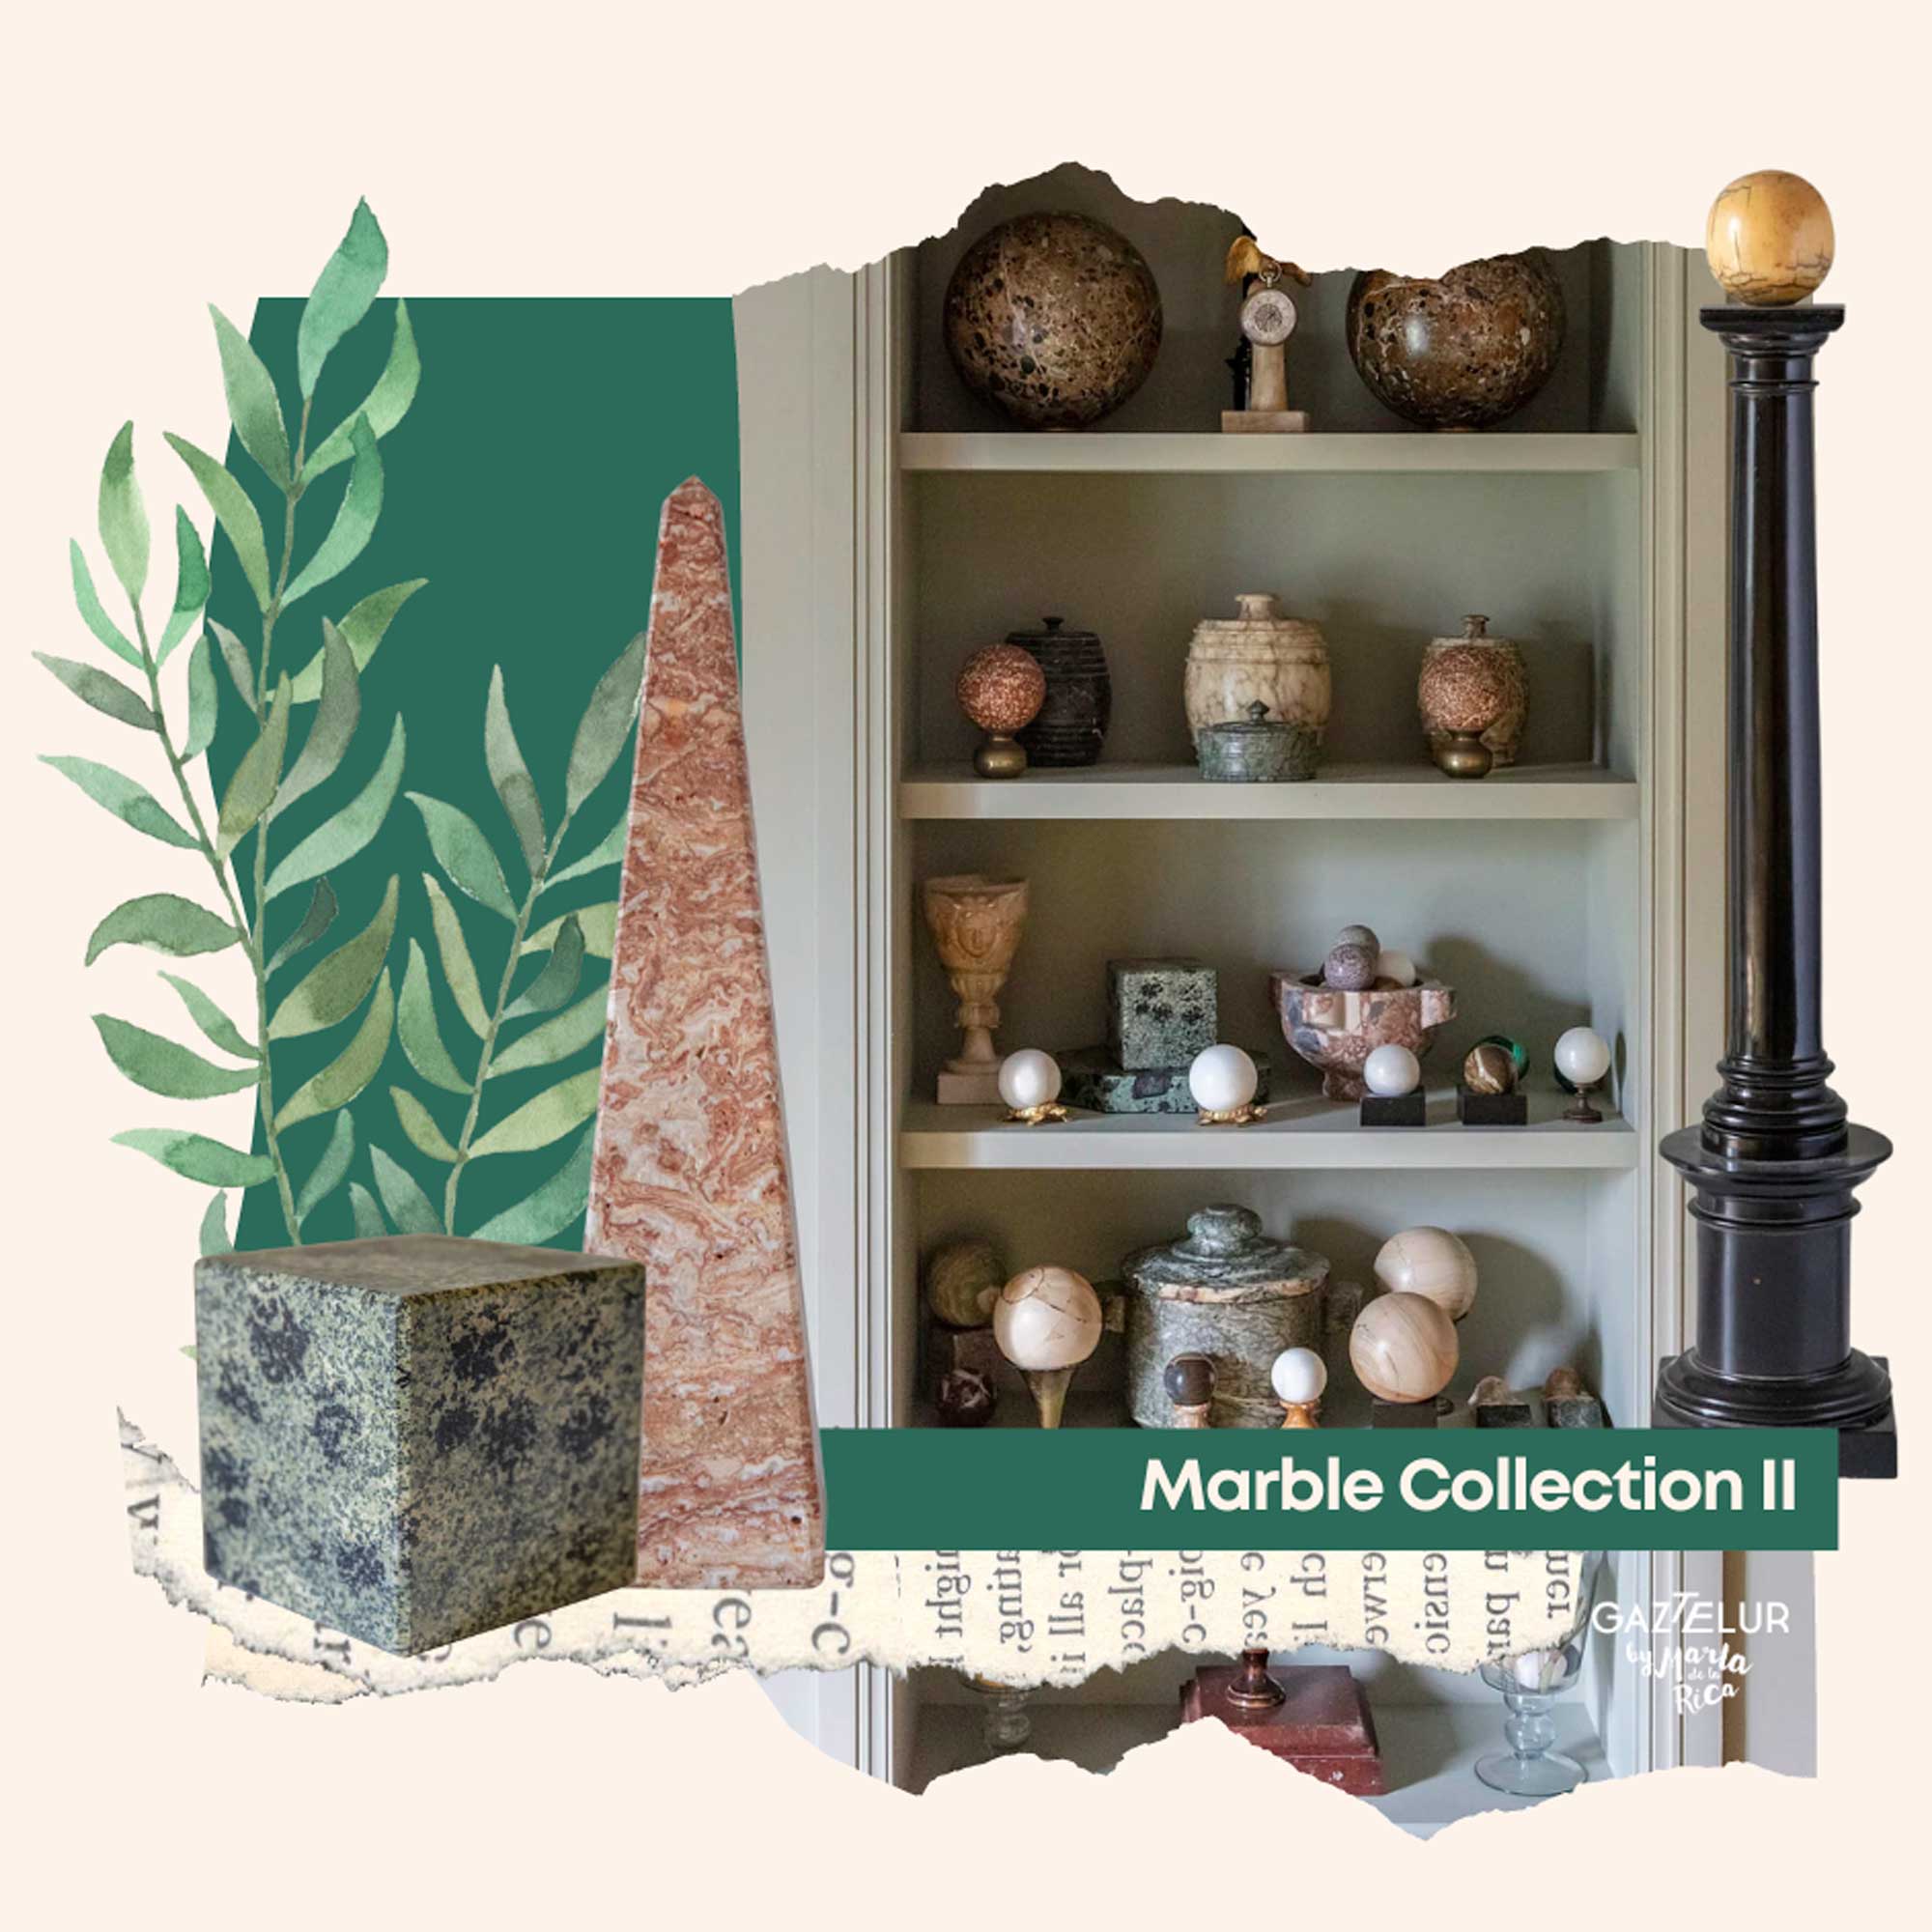 MARBLE COLLECTION II